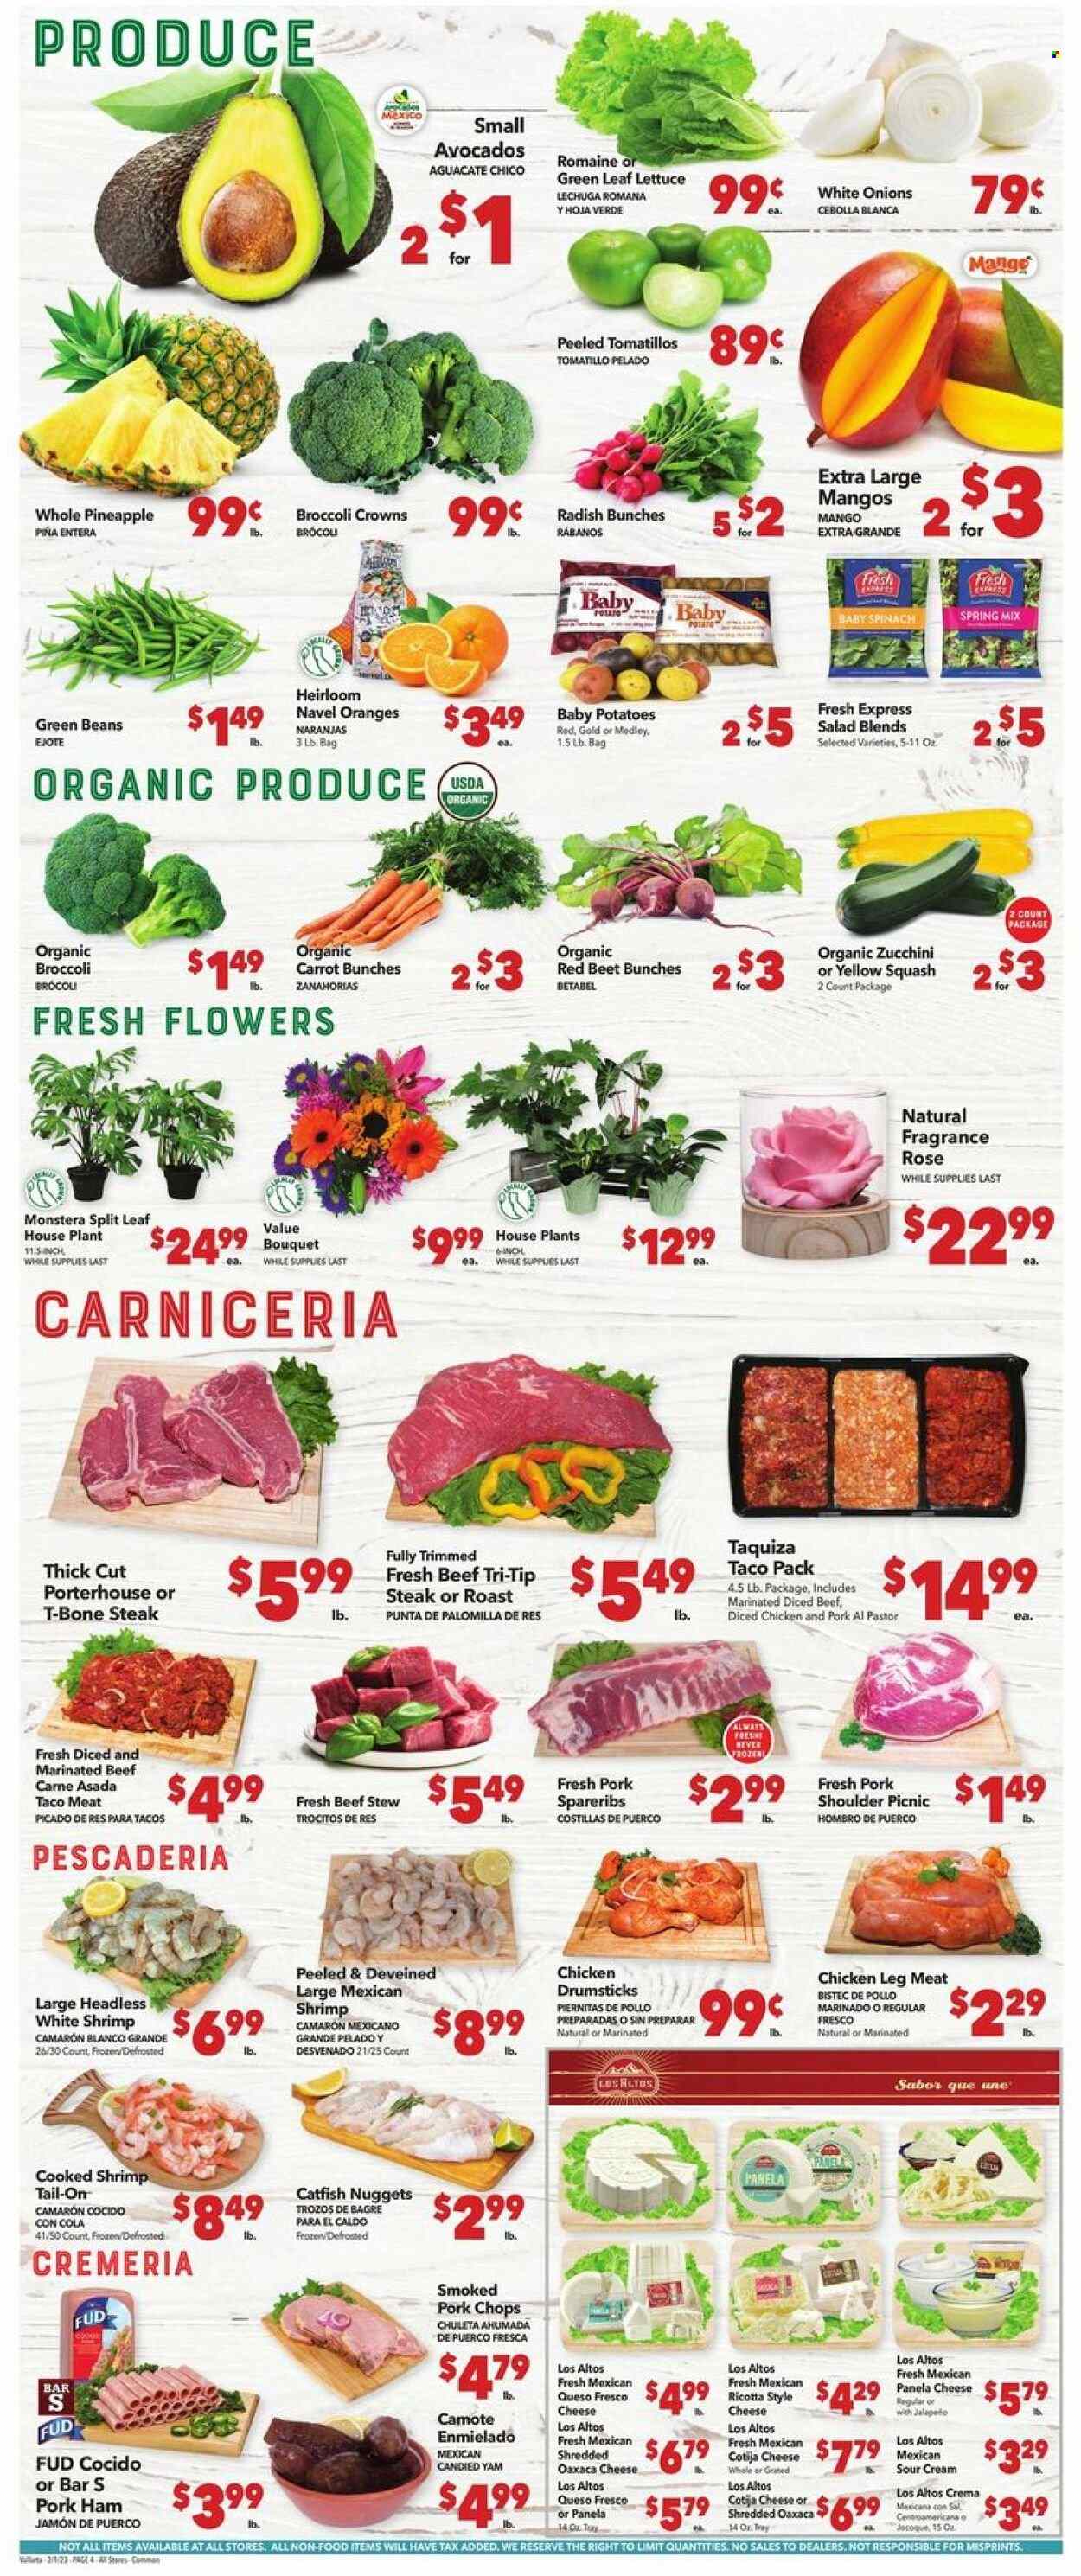 thumbnail - Vallarta Flyer - 02/01/2023 - 02/07/2023 - Sales products - beans, green beans, radishes, spinach, tomatillo, zucchini, potatoes, lettuce, salad, yellow squash, avocado, pineapple, oranges, chicken legs, chicken drumsticks, beef meat, t-bone steak, steak, diced beef, marinated beef, pork chops, pork meat, pork shoulder, pork spare ribs, catfish, shrimps, catfish nuggets, ham, ricotta, queso fresco, Panela cheese, sour cream, Mexicano, wine, rosé wine, fragrance, bunches, bouquet, rose, navel oranges. Page 4.